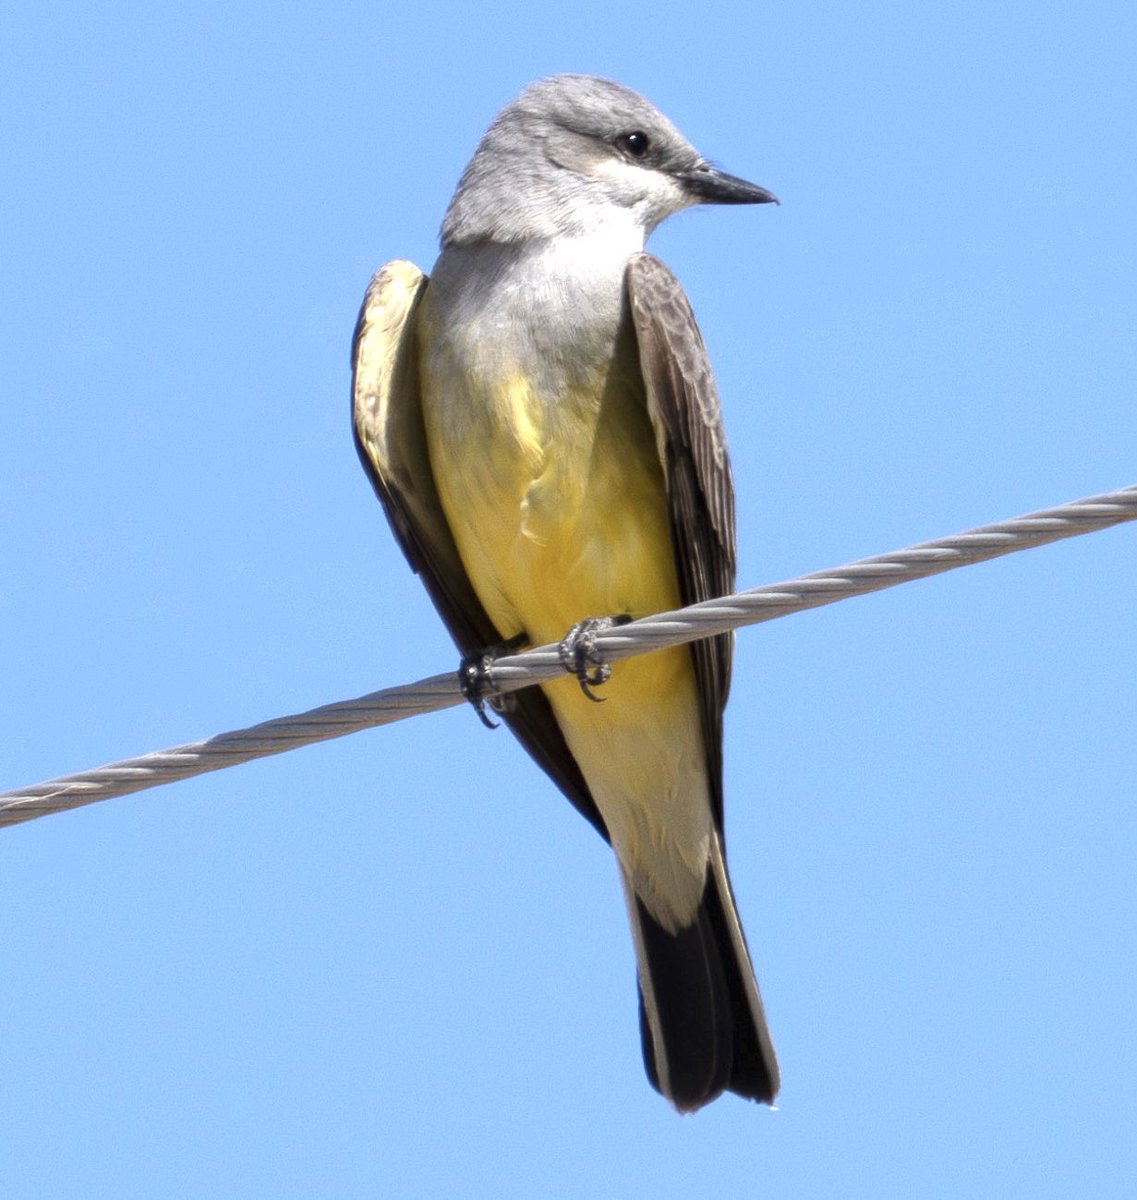 Western #kingbird doing what it likes to do most. Hang out
#Saltonsea #birding #unit1